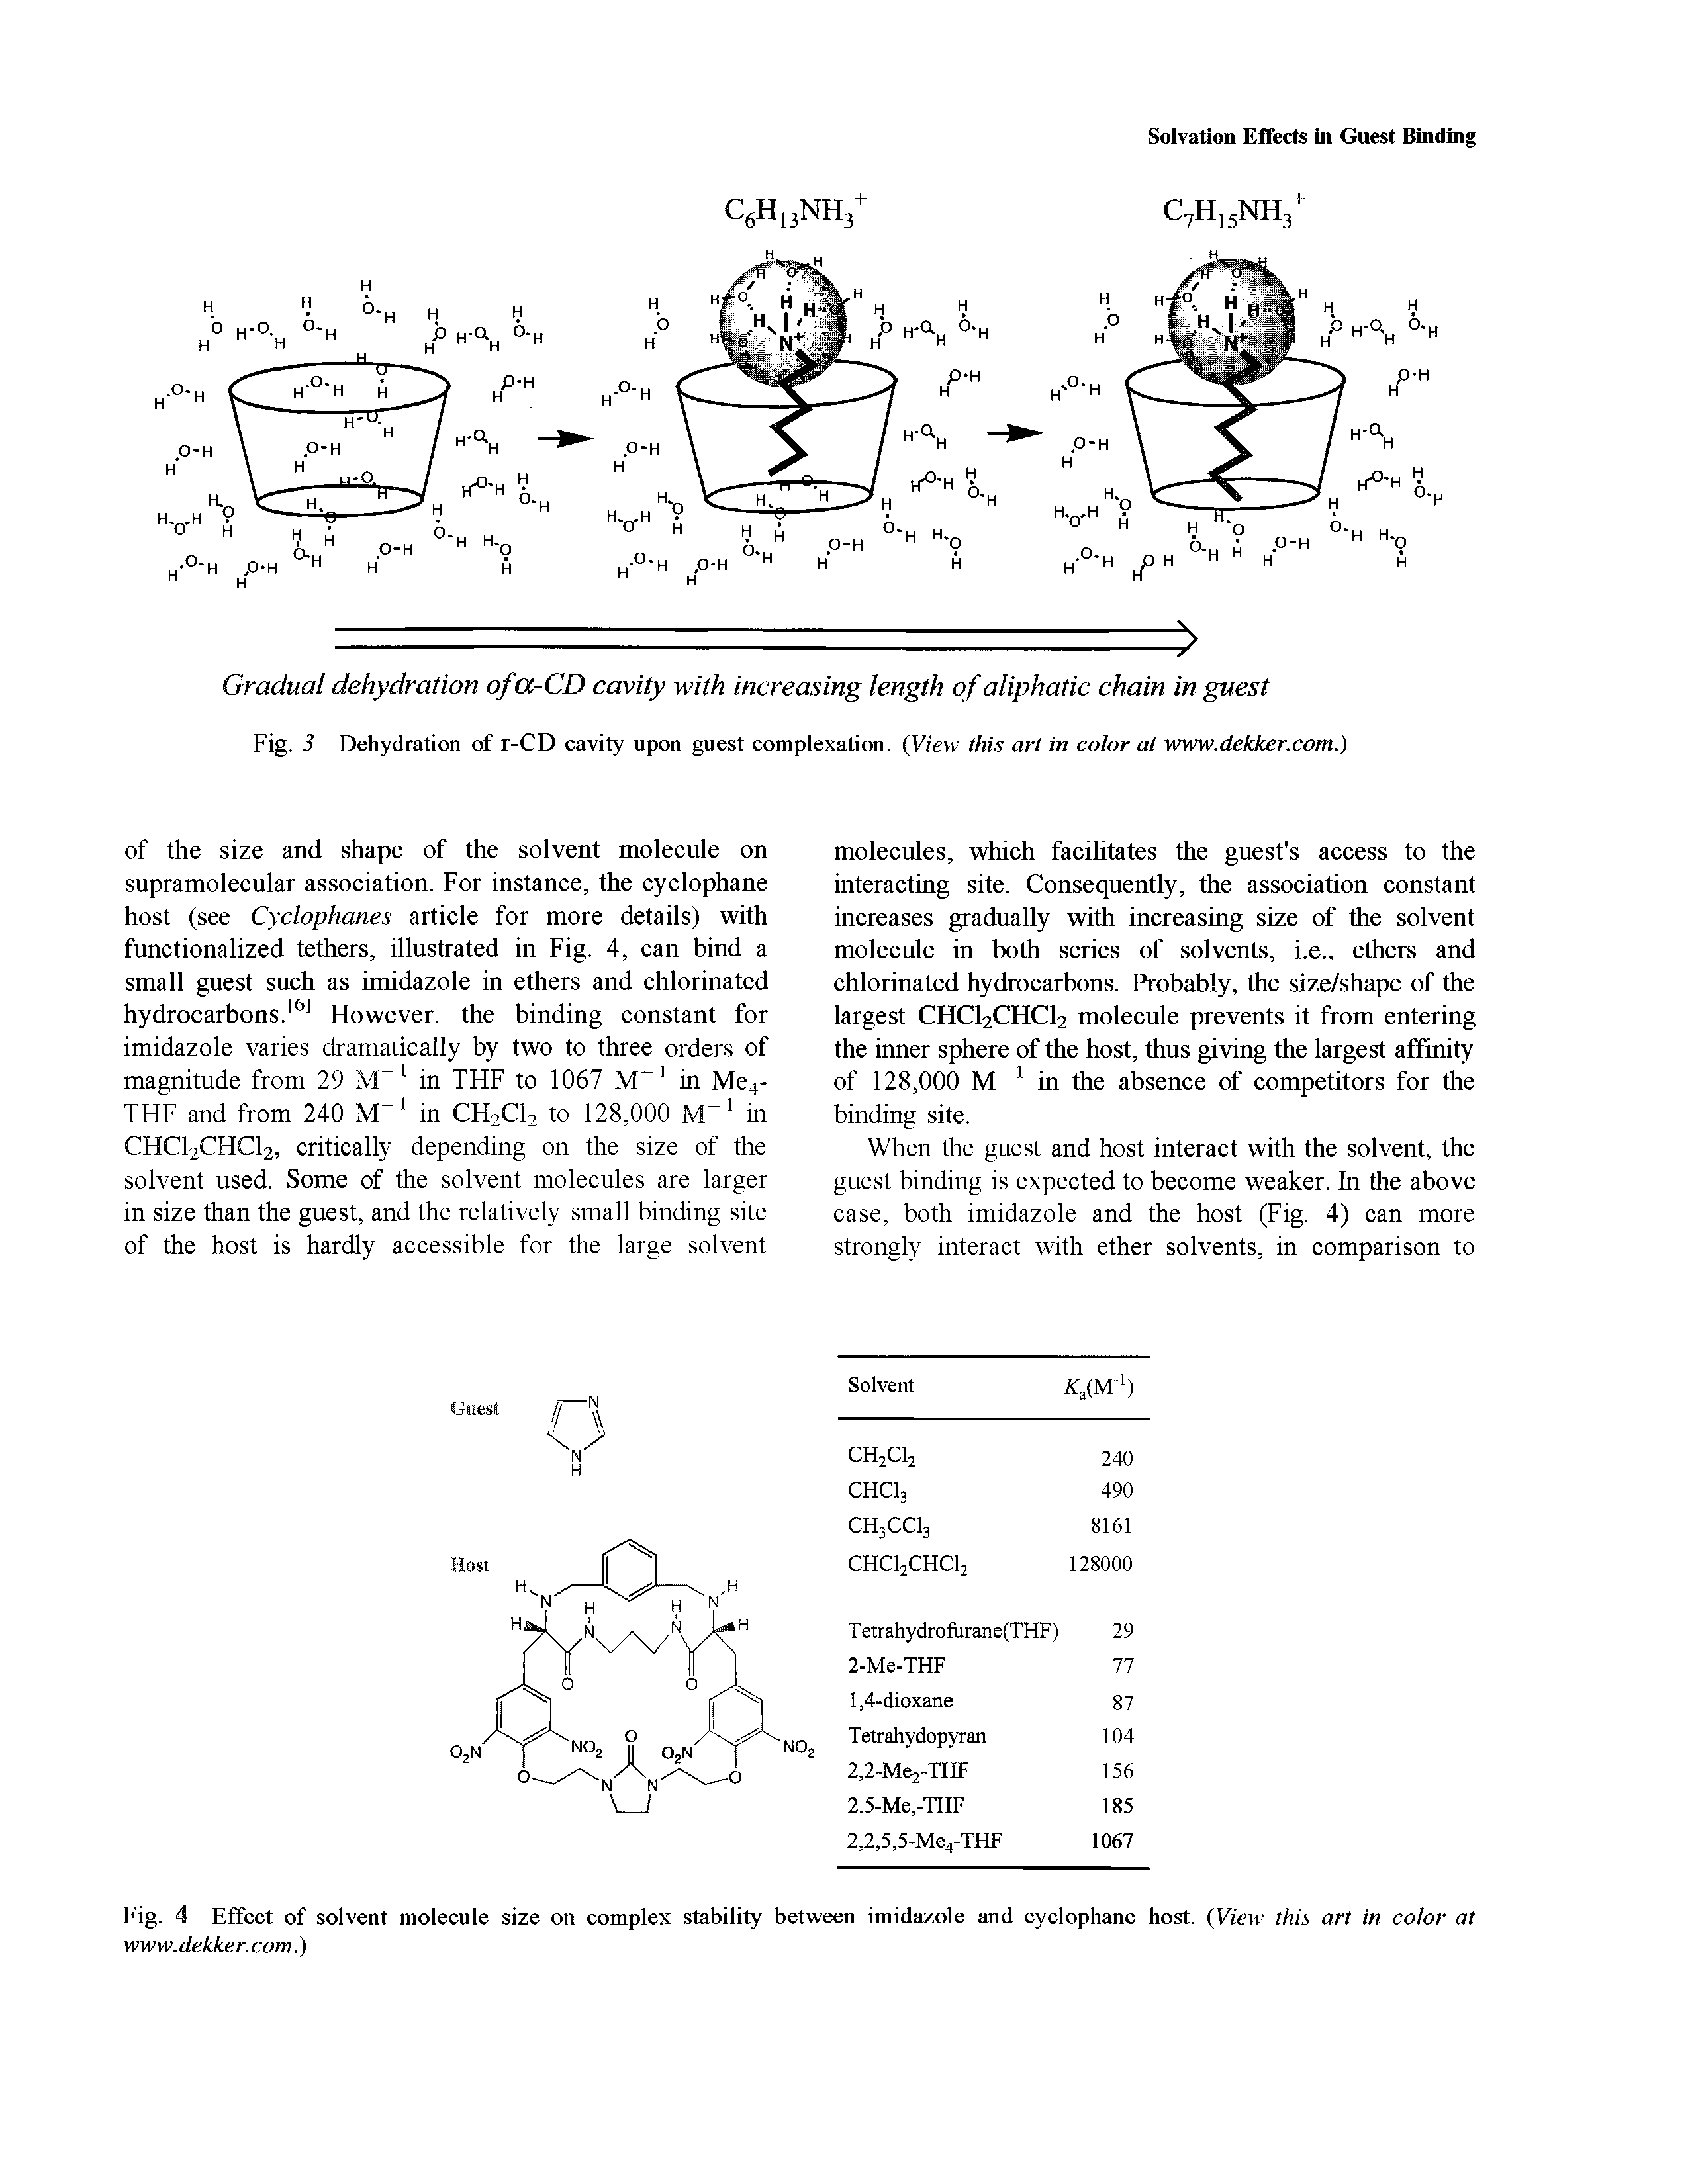 Fig. 4 Effect of solvent molecule size on complex stability between imidazole and cyclophane host. View thh art in color at WWW. dekker. com.)...